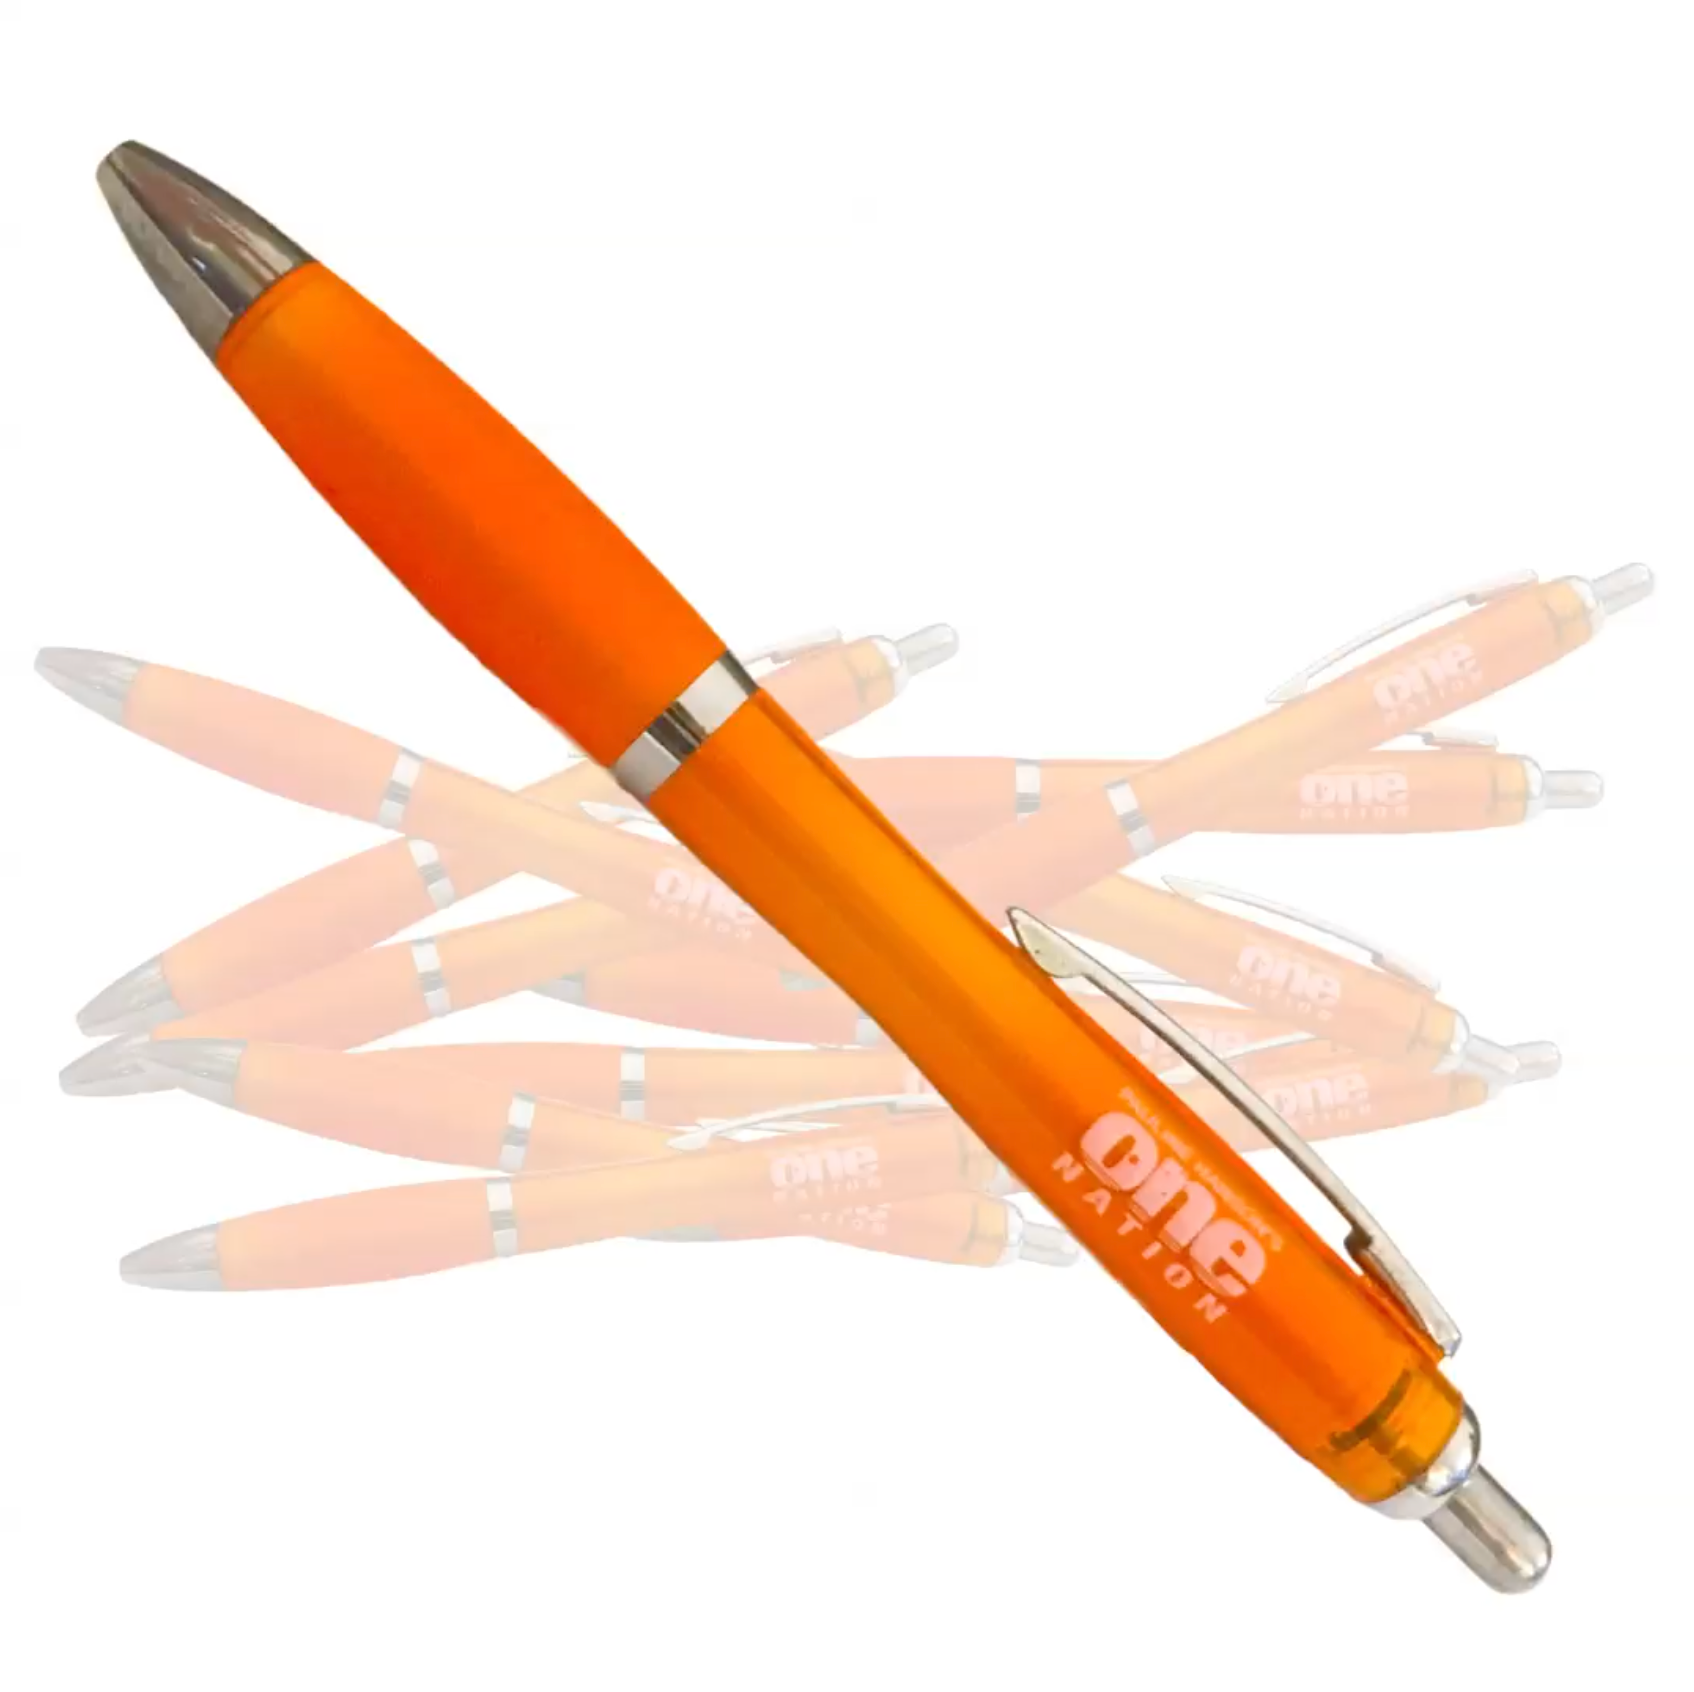 One Nation Pens